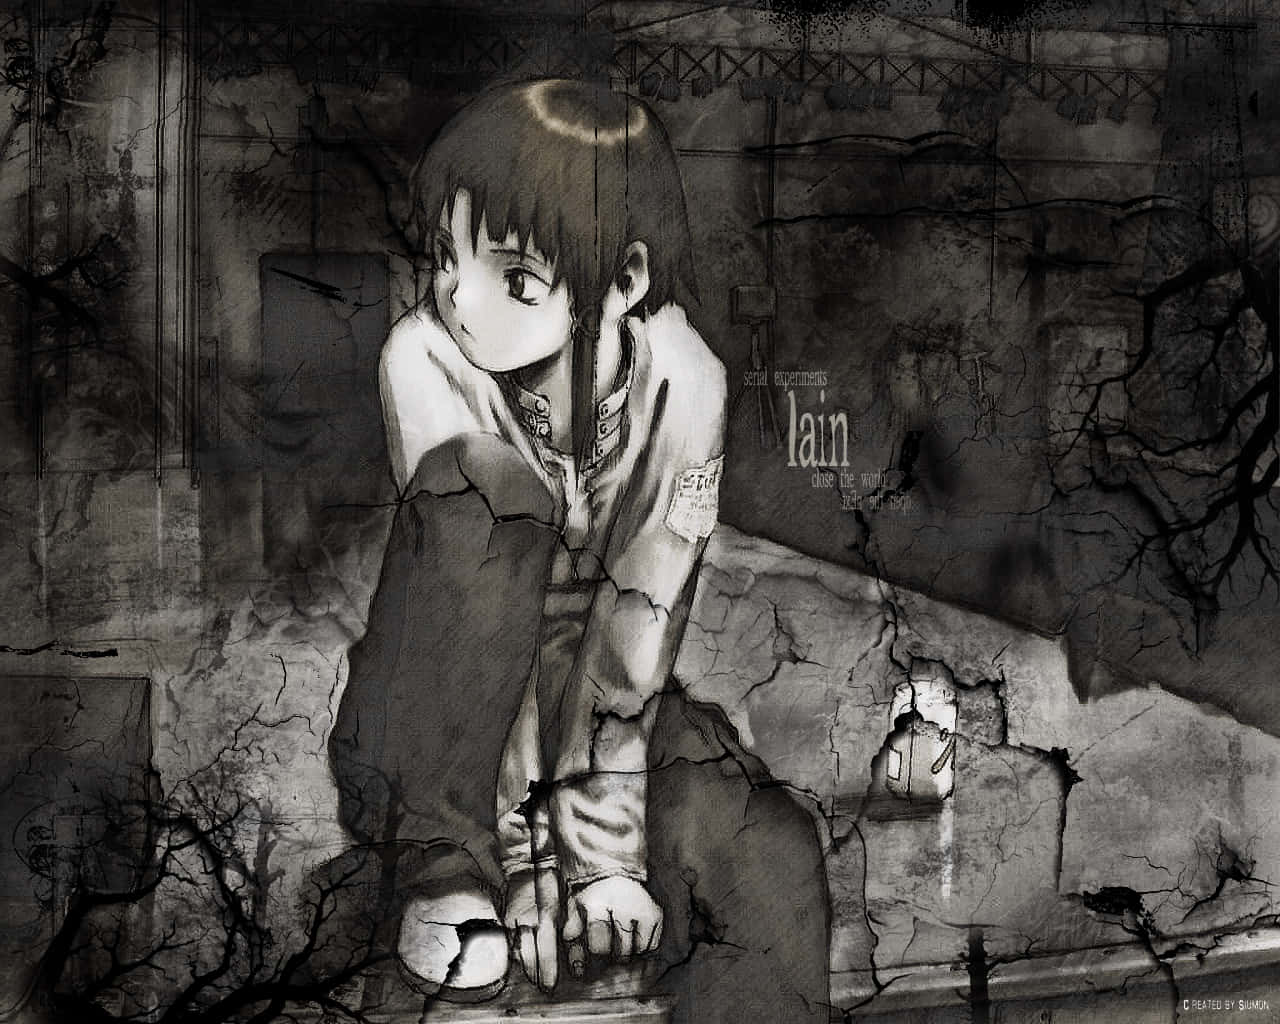 A Still From Serial Experiments Lain